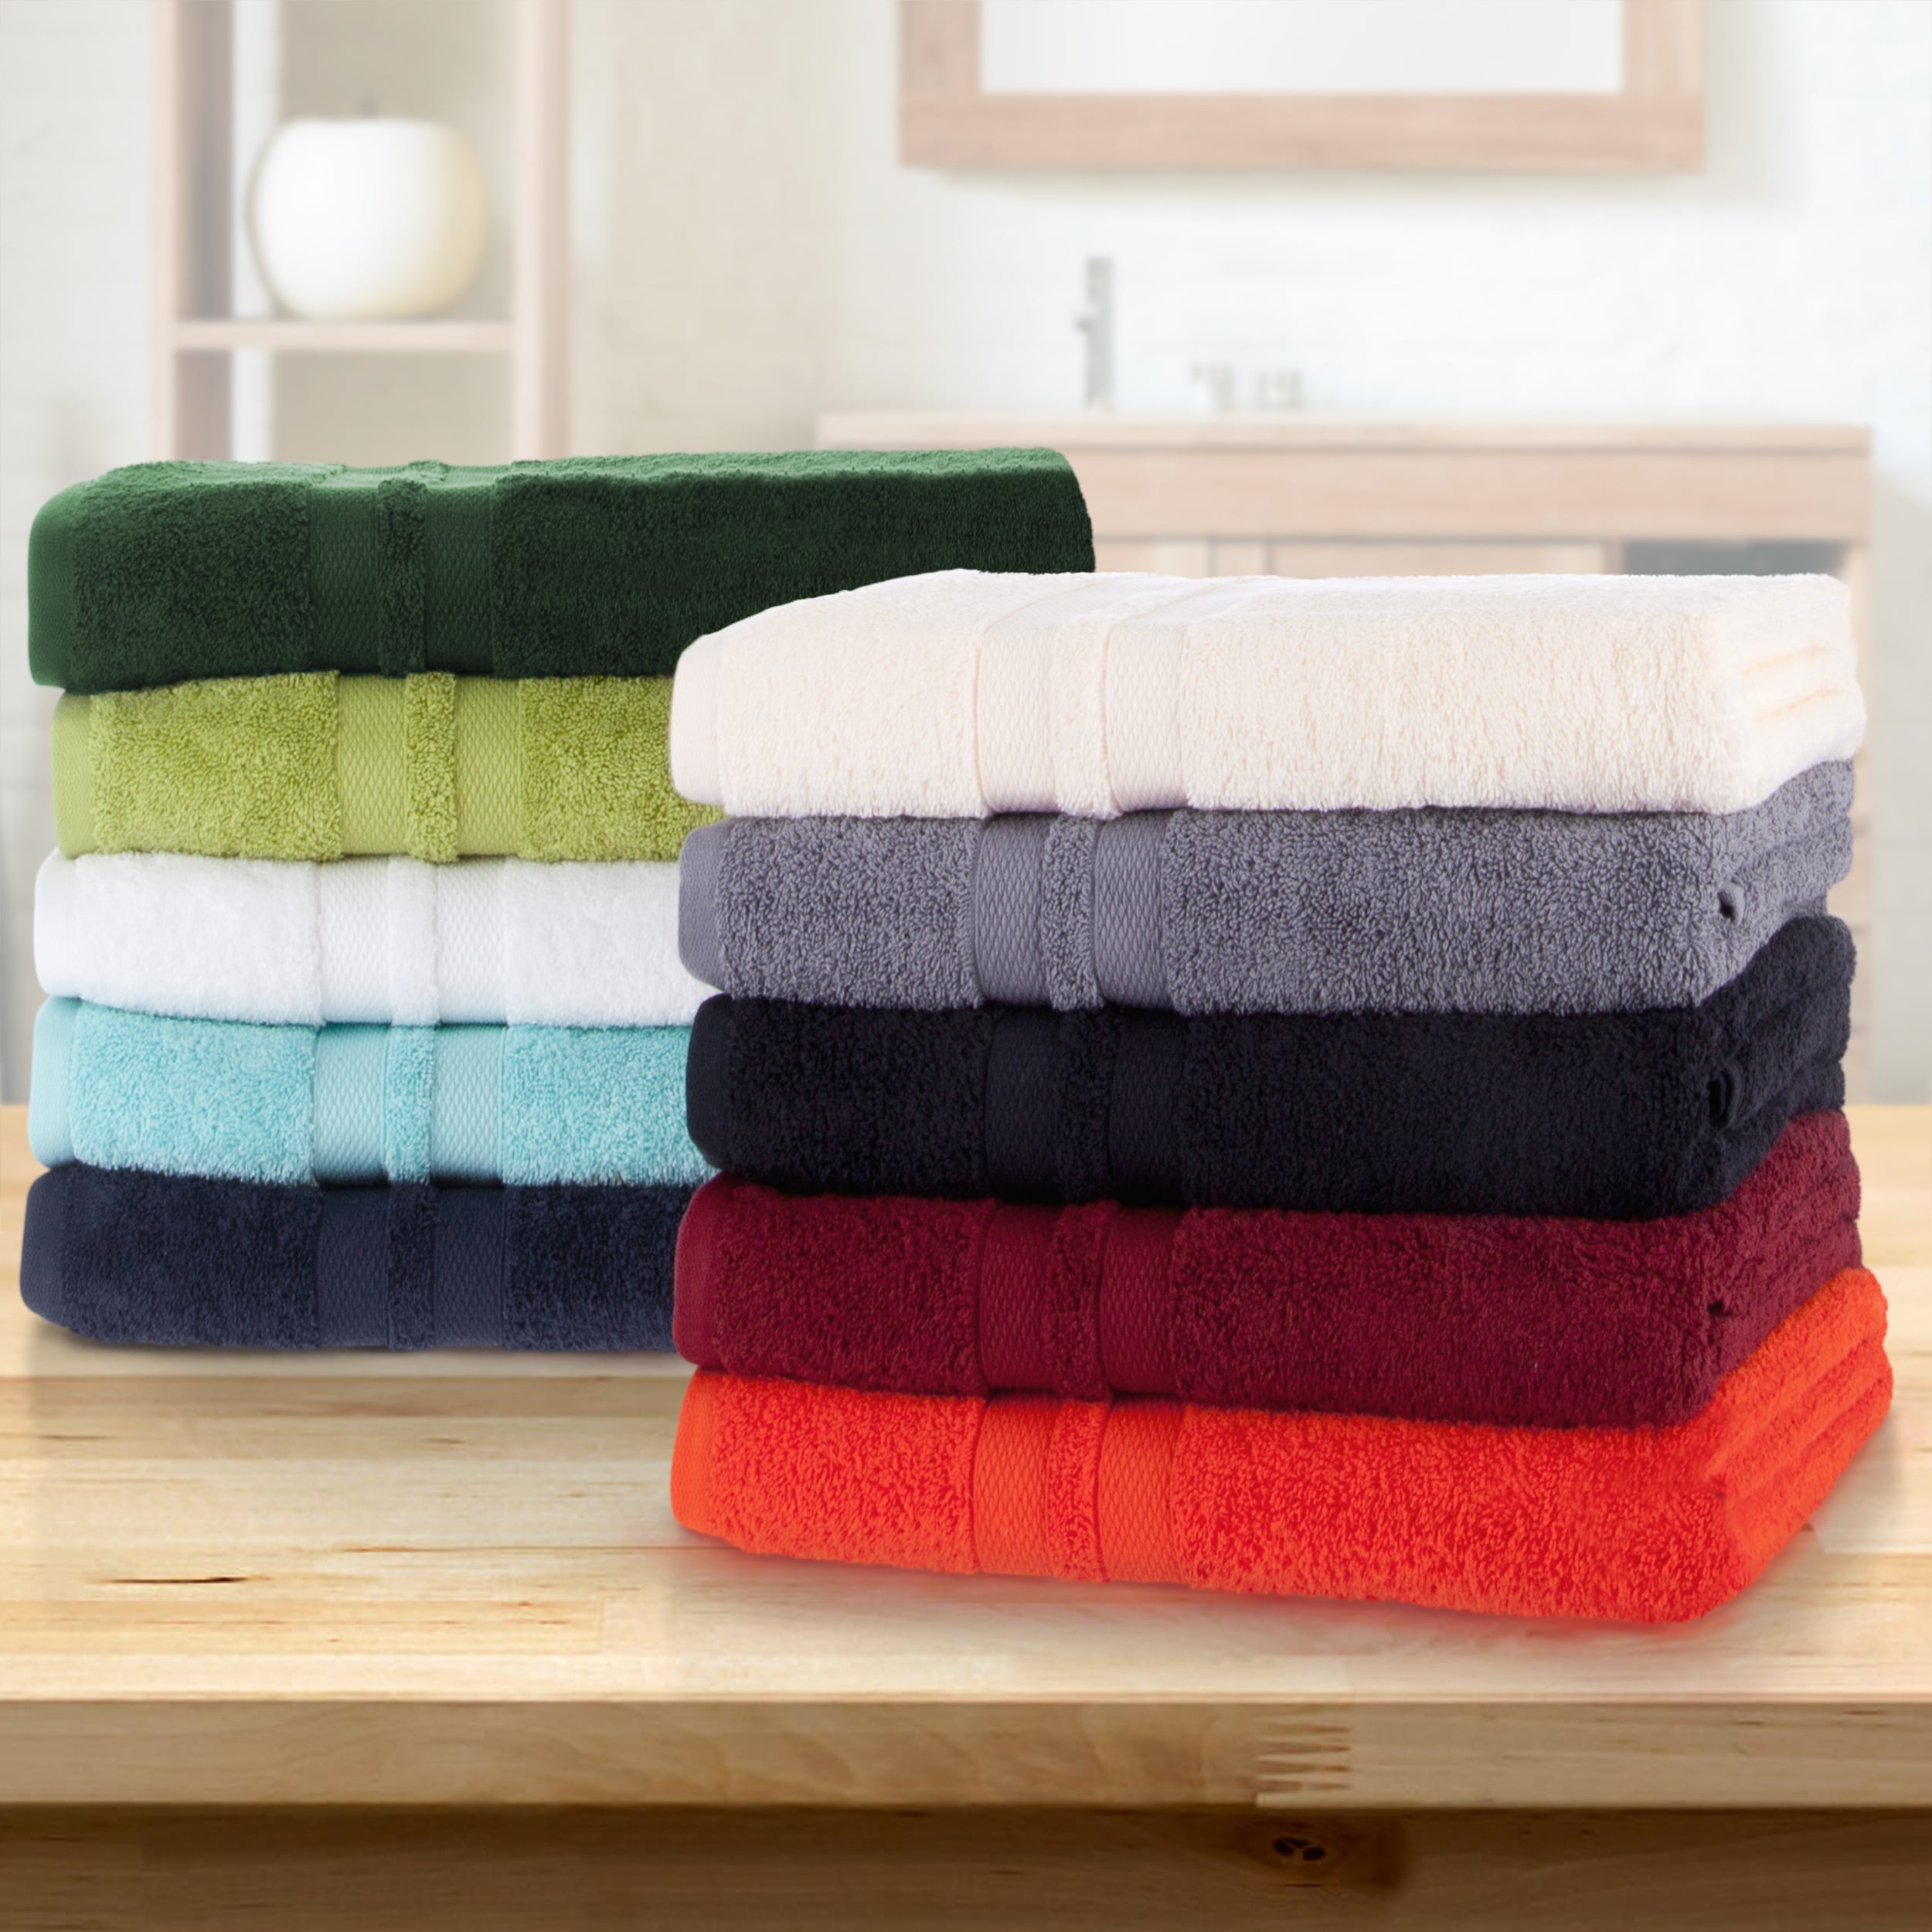 Premium 4 Pack Luxury Spa Bath Sheet Extra Large Towels - 30x54 inches, 500  GSM